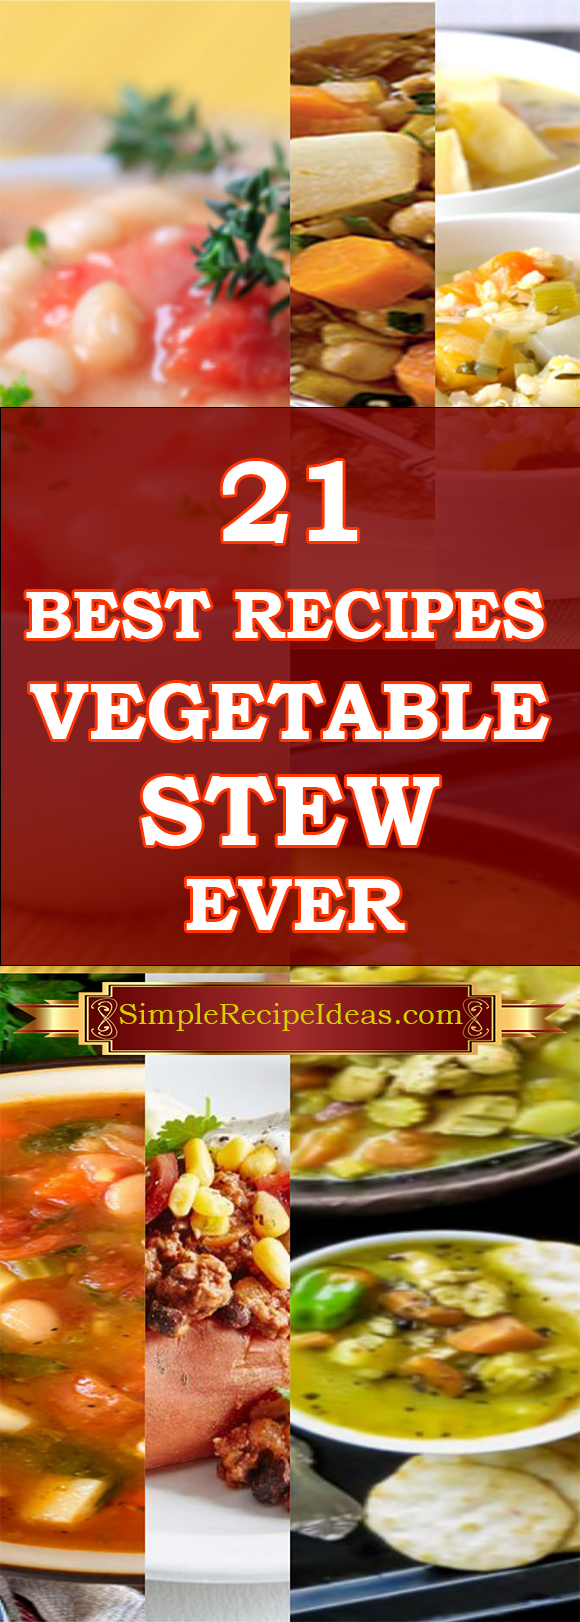 21 of the Best Real Simple Vegetable Stew Ever - Best Recipes Ever